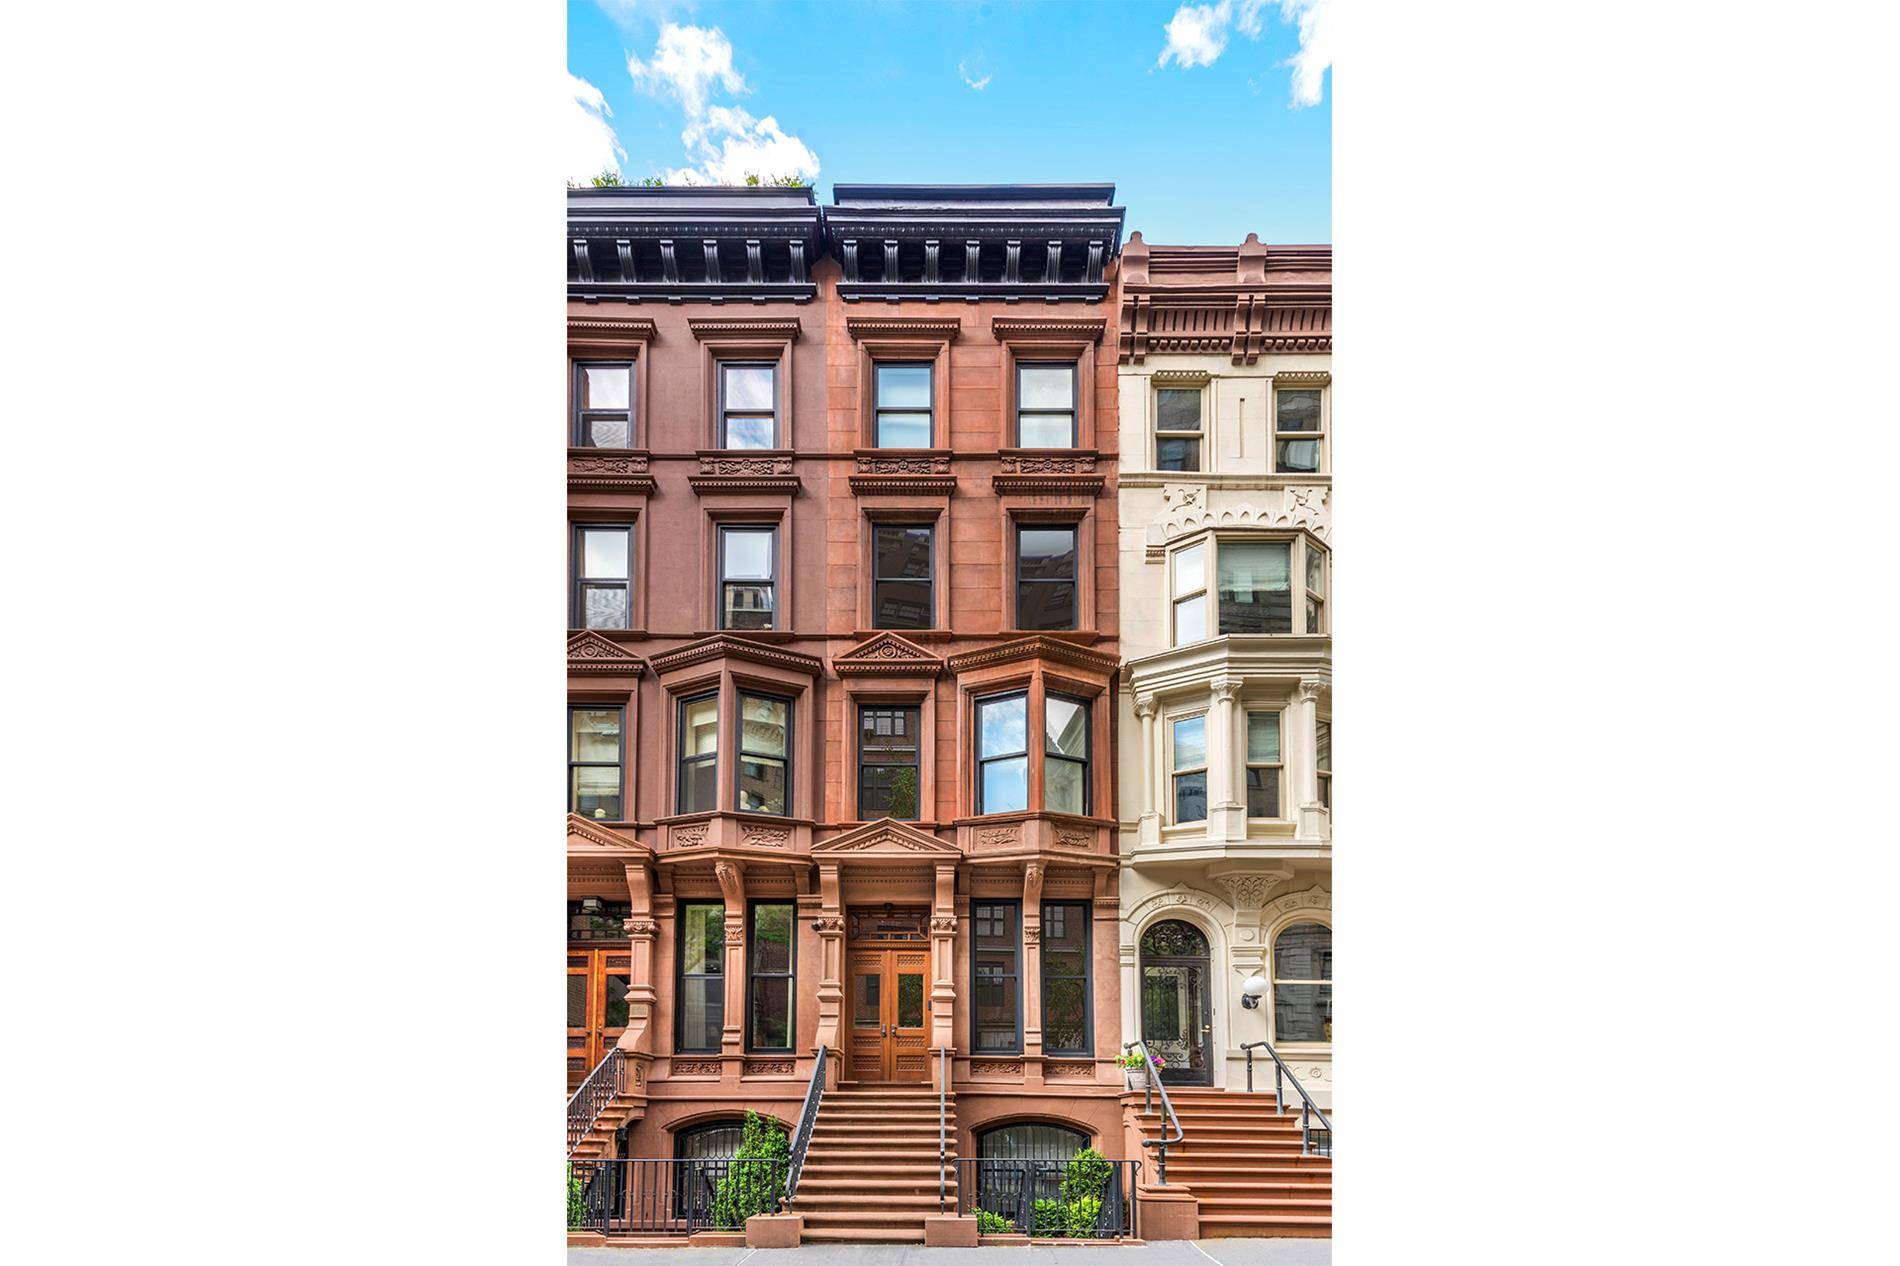 This truly exceptional townhouse boasts 6000 square feet of perfection and is situated on one of the best blocks in New York 64th Street between Park and Madison Avenues.